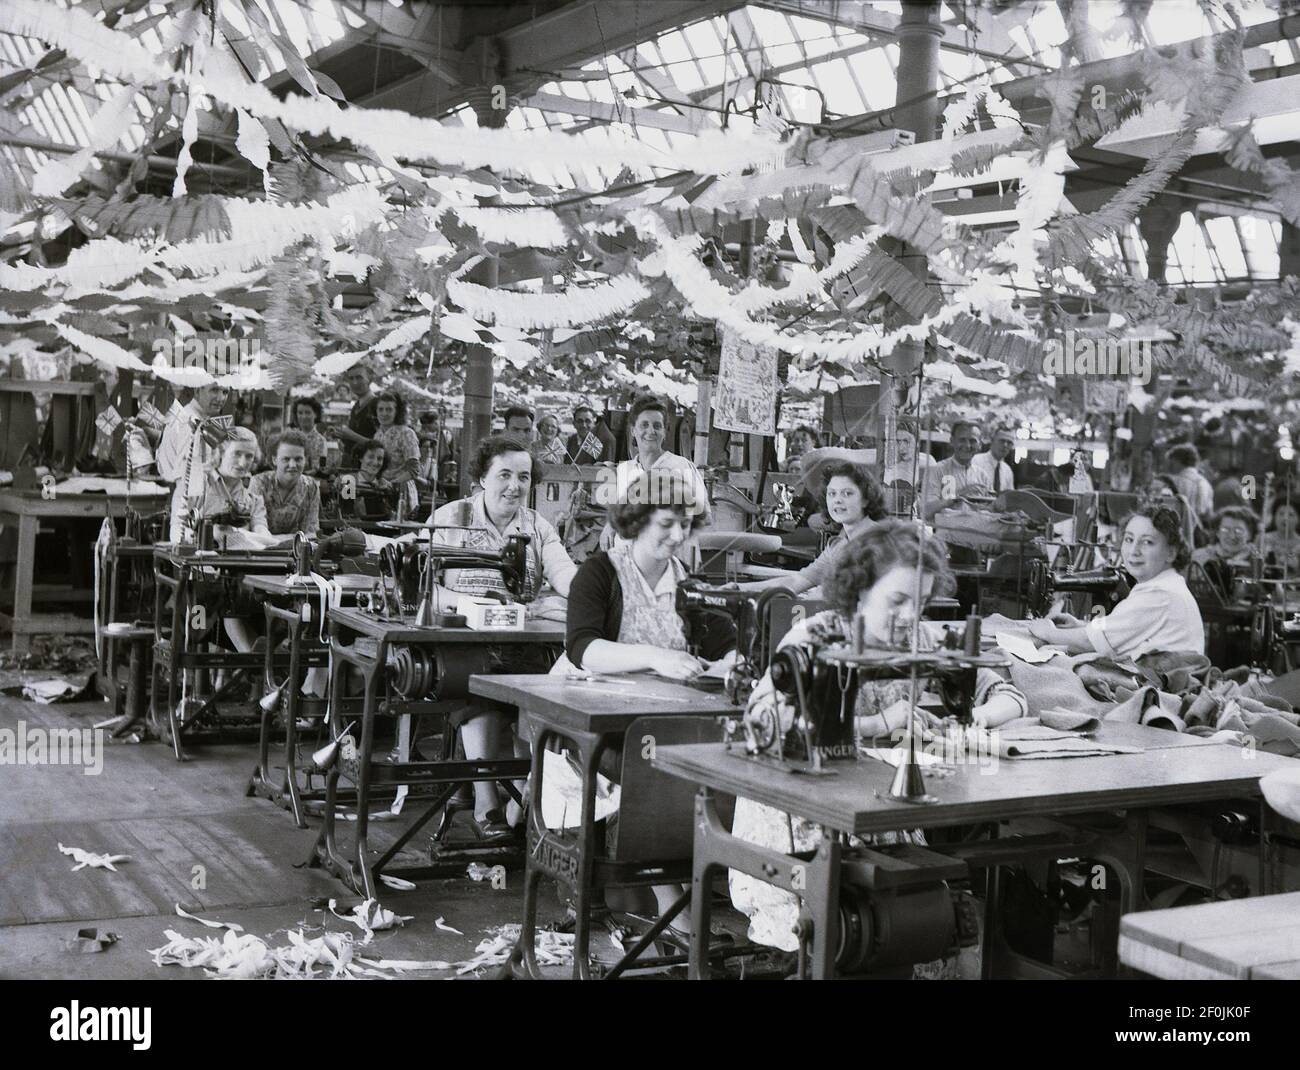 1953, historical, female wiorkers at drapery company, Hepworths of Leeds, England, UK, sitting at work benches witn sowing machines. The factory floor is decorated with bunting and flags celebrating the Queen's coronation. The Providence Works on Clay Pit Lane  was the factory of Joseph Hepworth and Son, a clothing company began in 1865 and which by 1905 had 143 shops. Later in the century, Hepworths became Next. Stock Photo